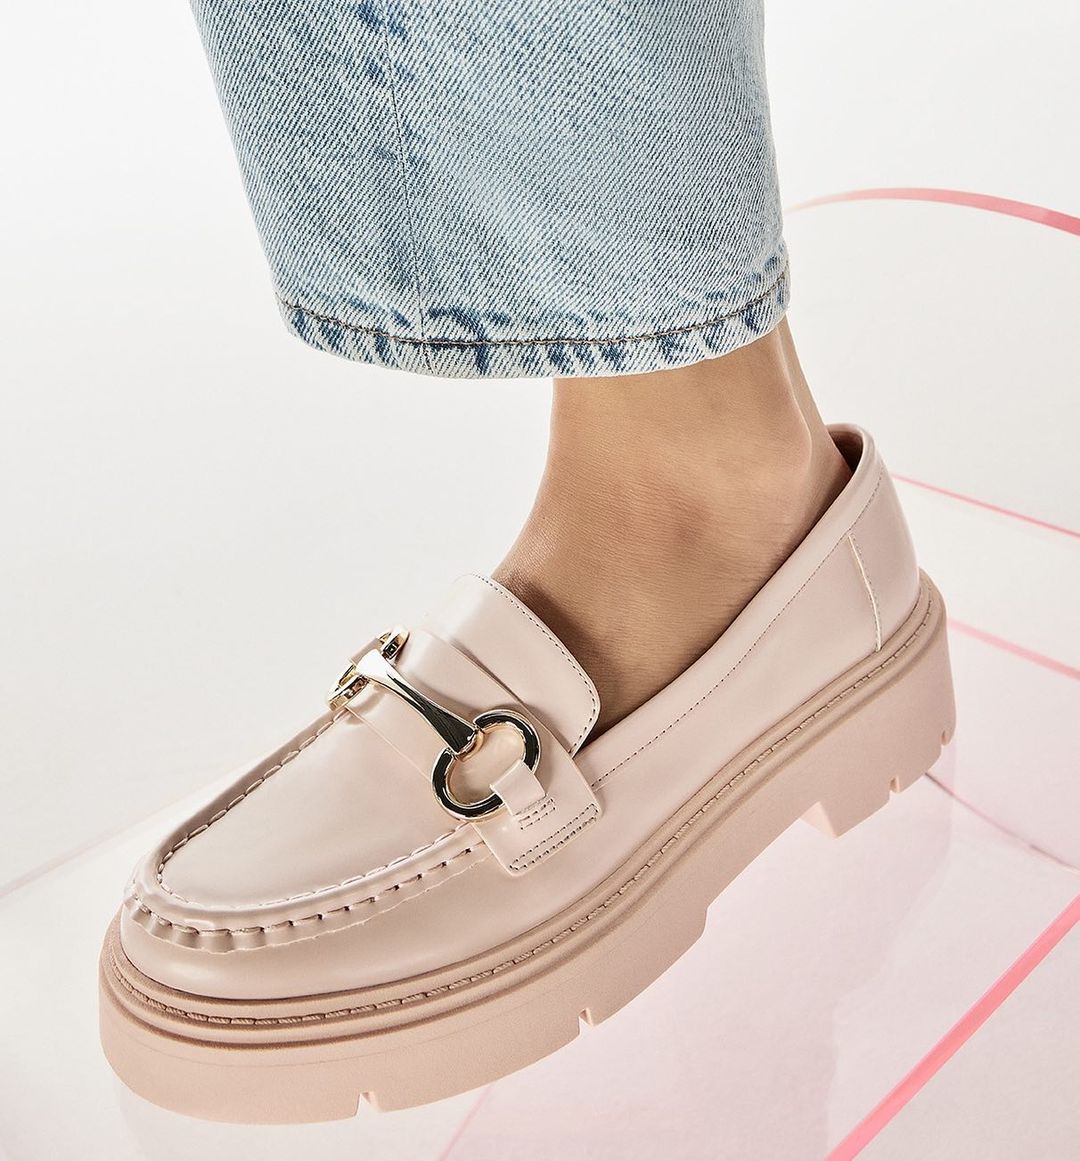 single pink loafer worn by a model